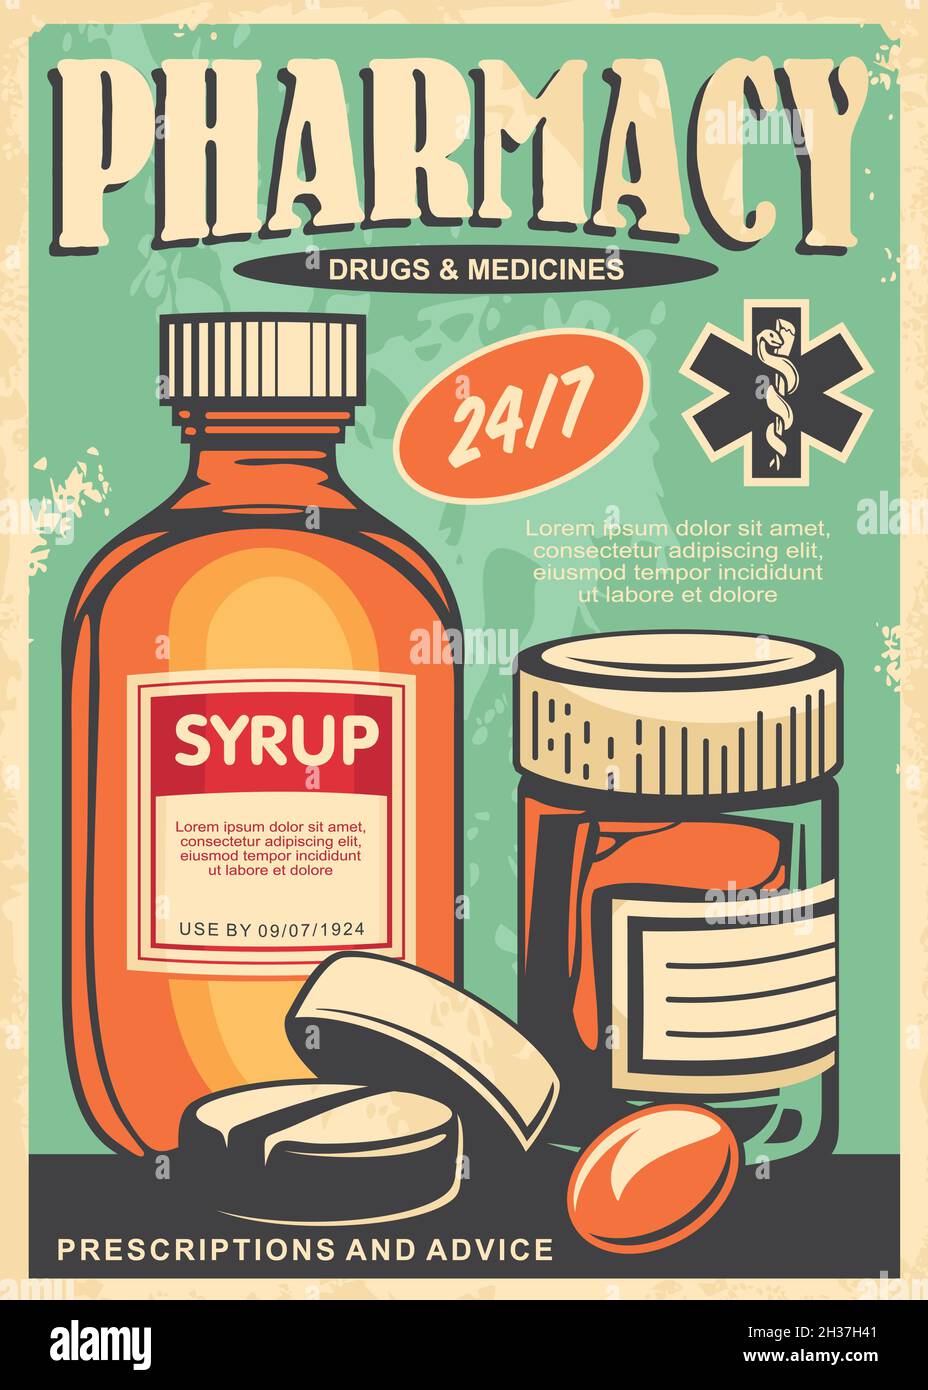 Pharmacy retro poster design with medicines, syrup, pills and medicament. Vintage sign for old apothecary. Healthcare and medical vector illustration. Stock Vector